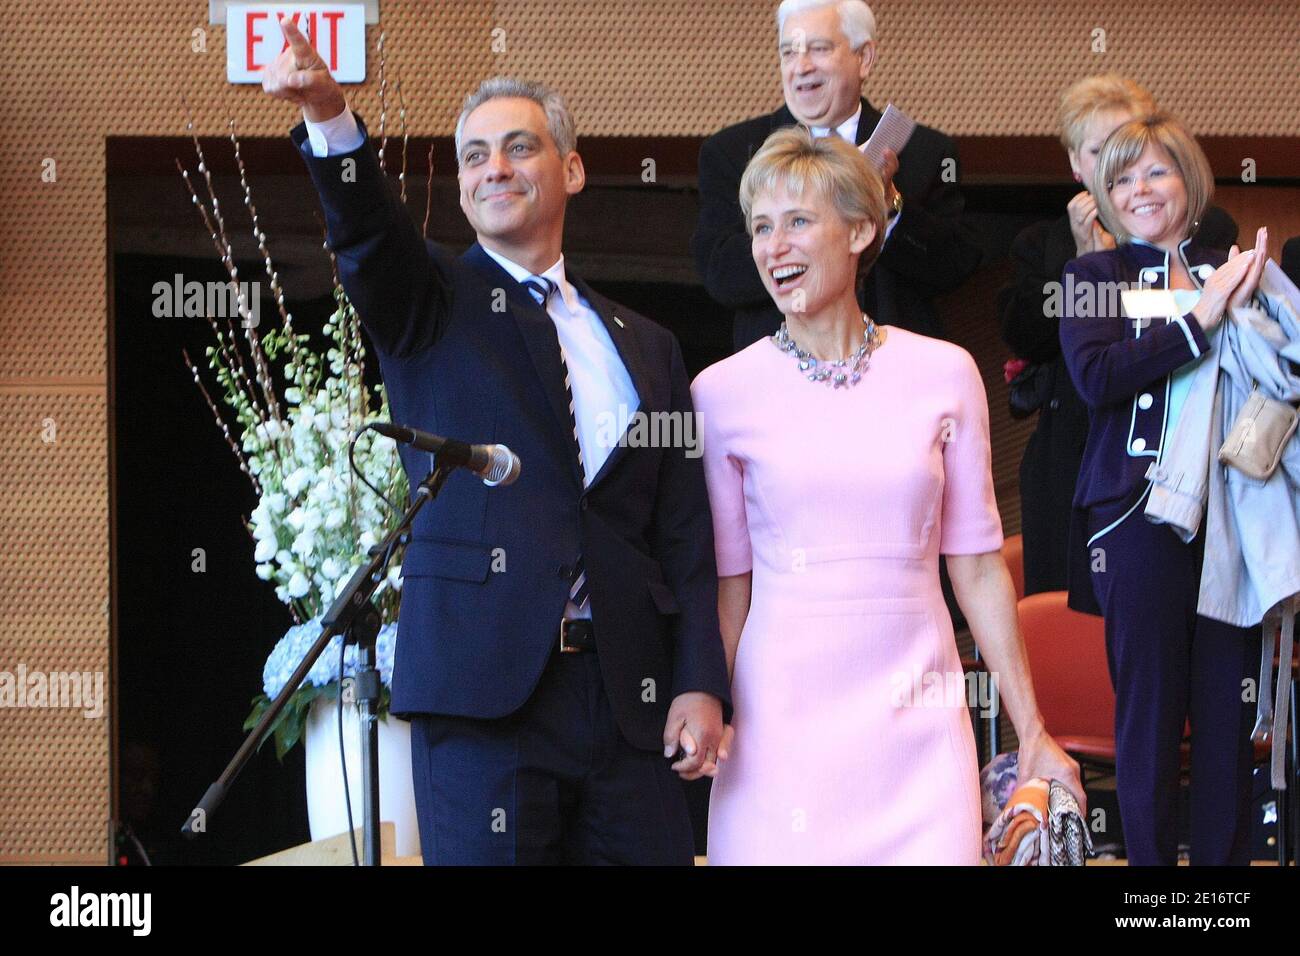 Mayor-elect Rahm Emanuel and his wife Amy Rule Emanuel, walk onto the stage for a swearing-in ceremony at Millenium Park in Chicago, Illinois on May 16, 2011. Photo by Alexandra Buxbaum/ABACAPRESS.COM Stock Photo